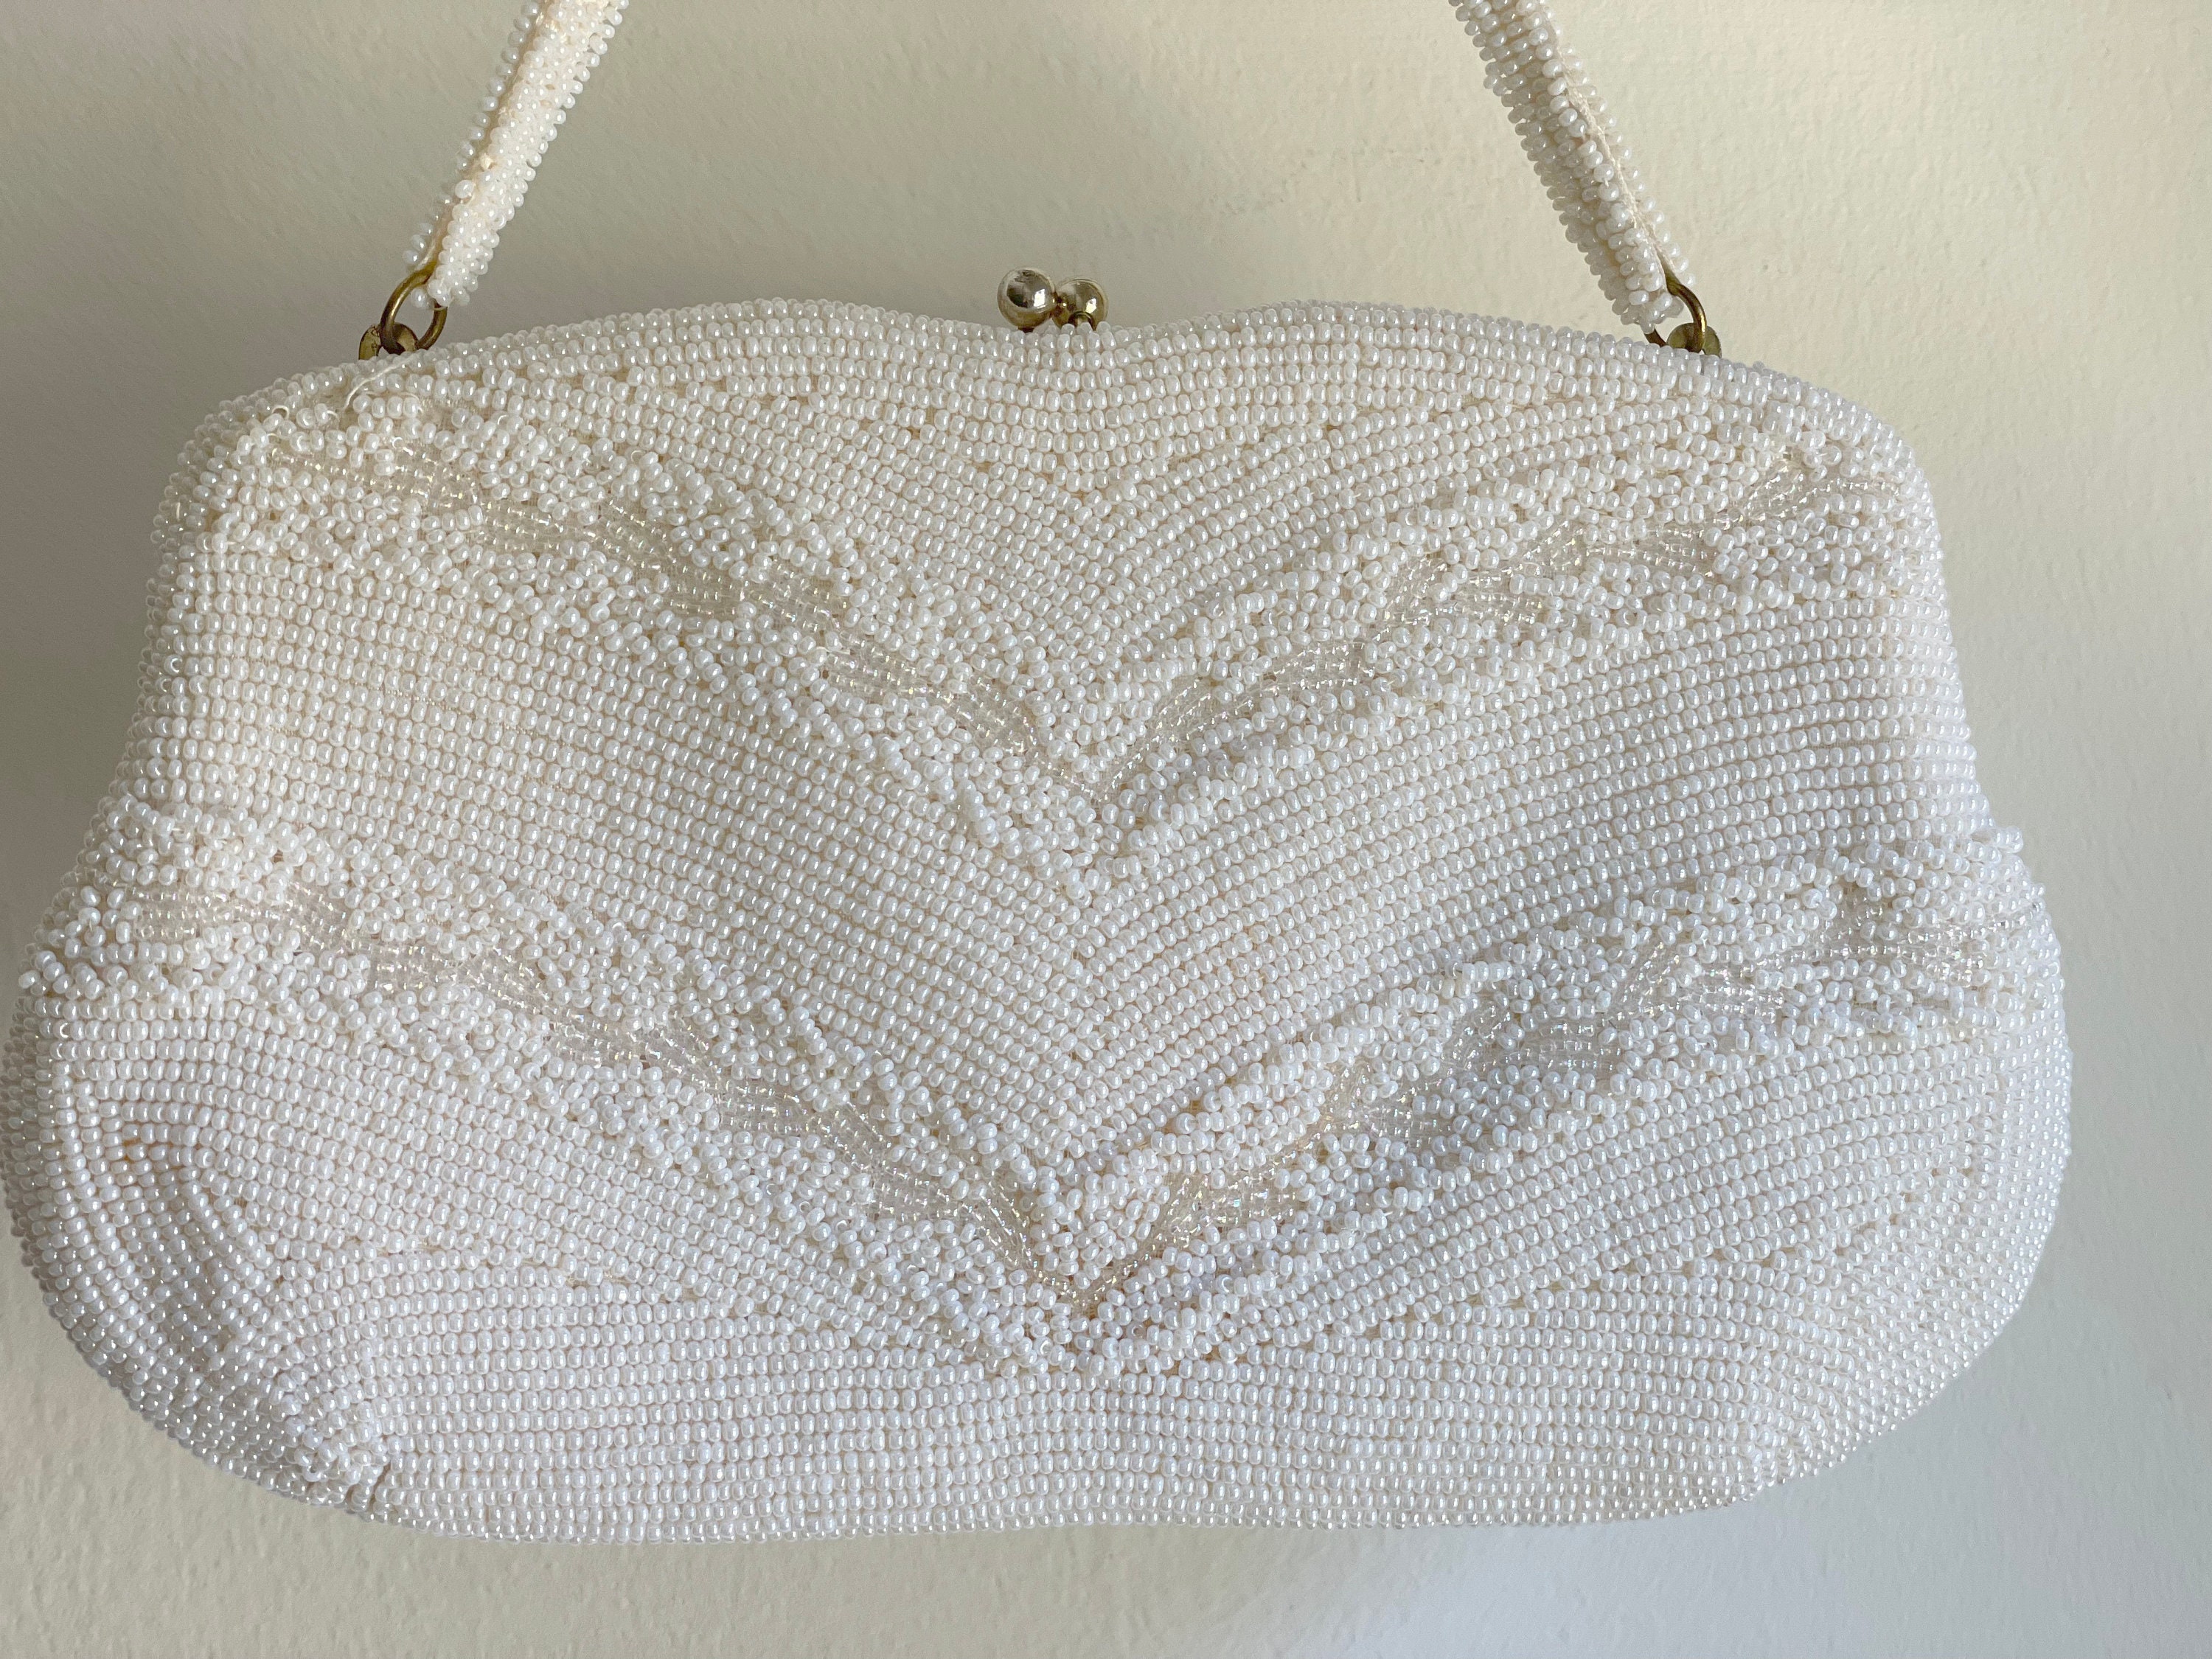 Vintage 1960s White Beaded Evening Bag - Purse with Floral Needlepoint  Design